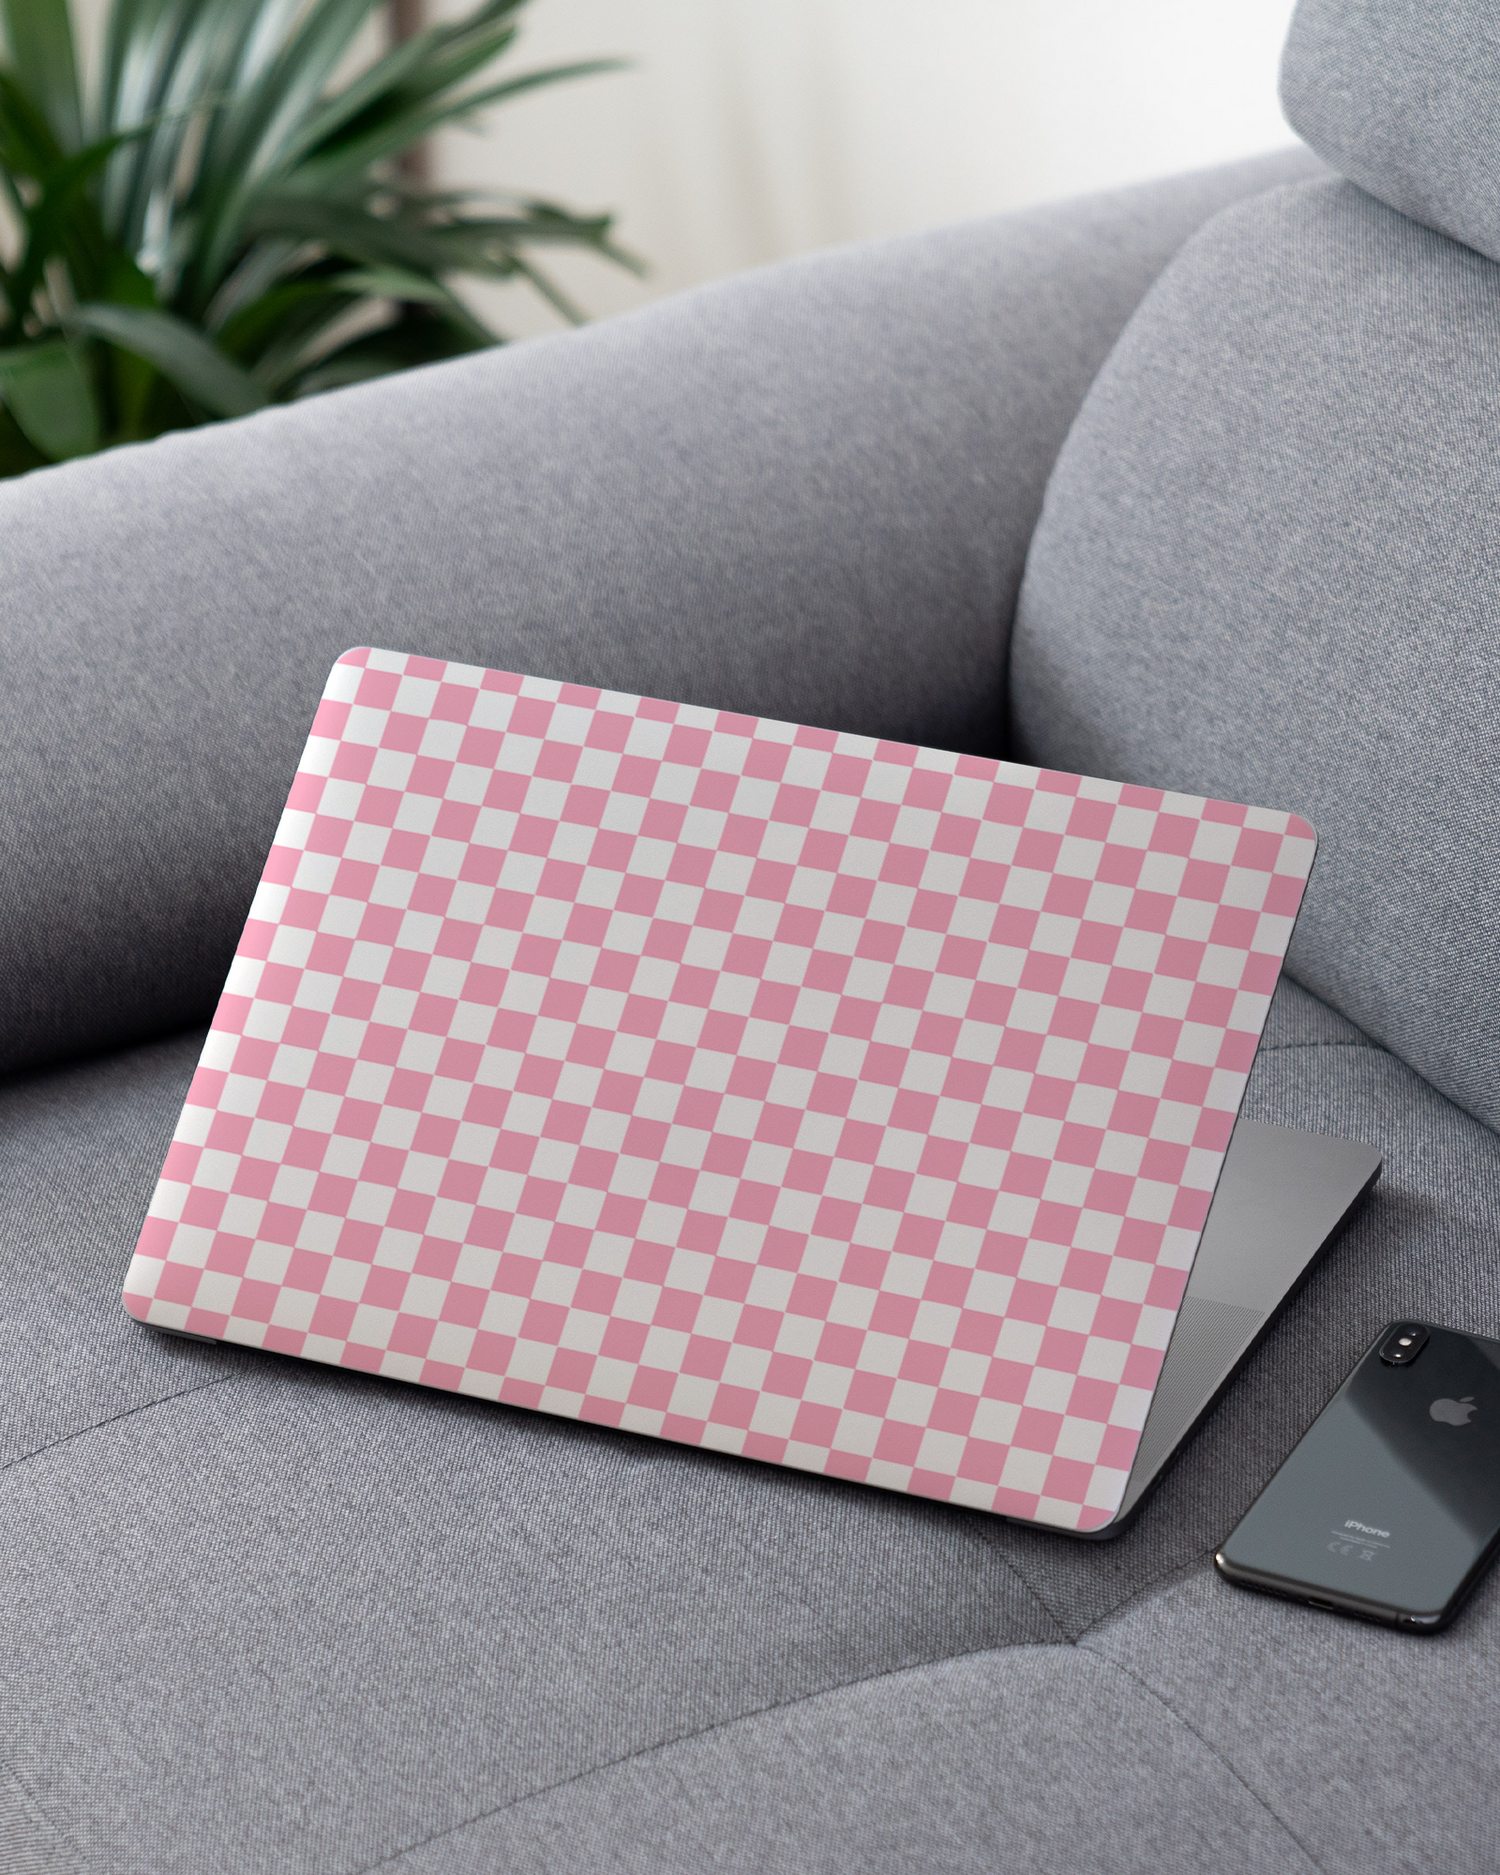 Pink Checkerboard Laptop Skin for 13 inch Apple MacBooks on a couch